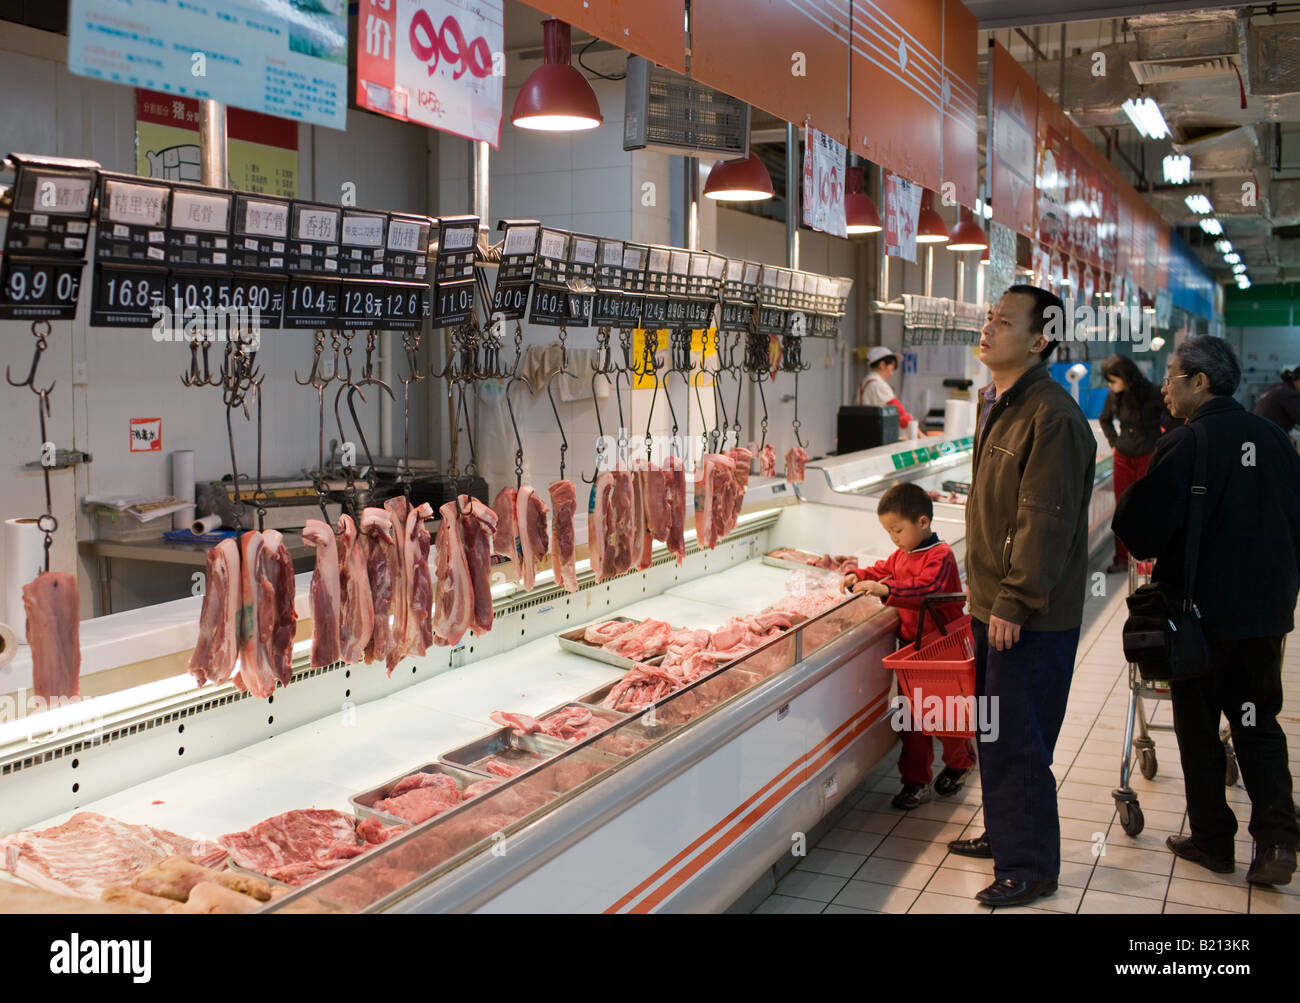 Shoppers at meat counter in supermarket in Chongqing Sichuan Province China Stock Photo